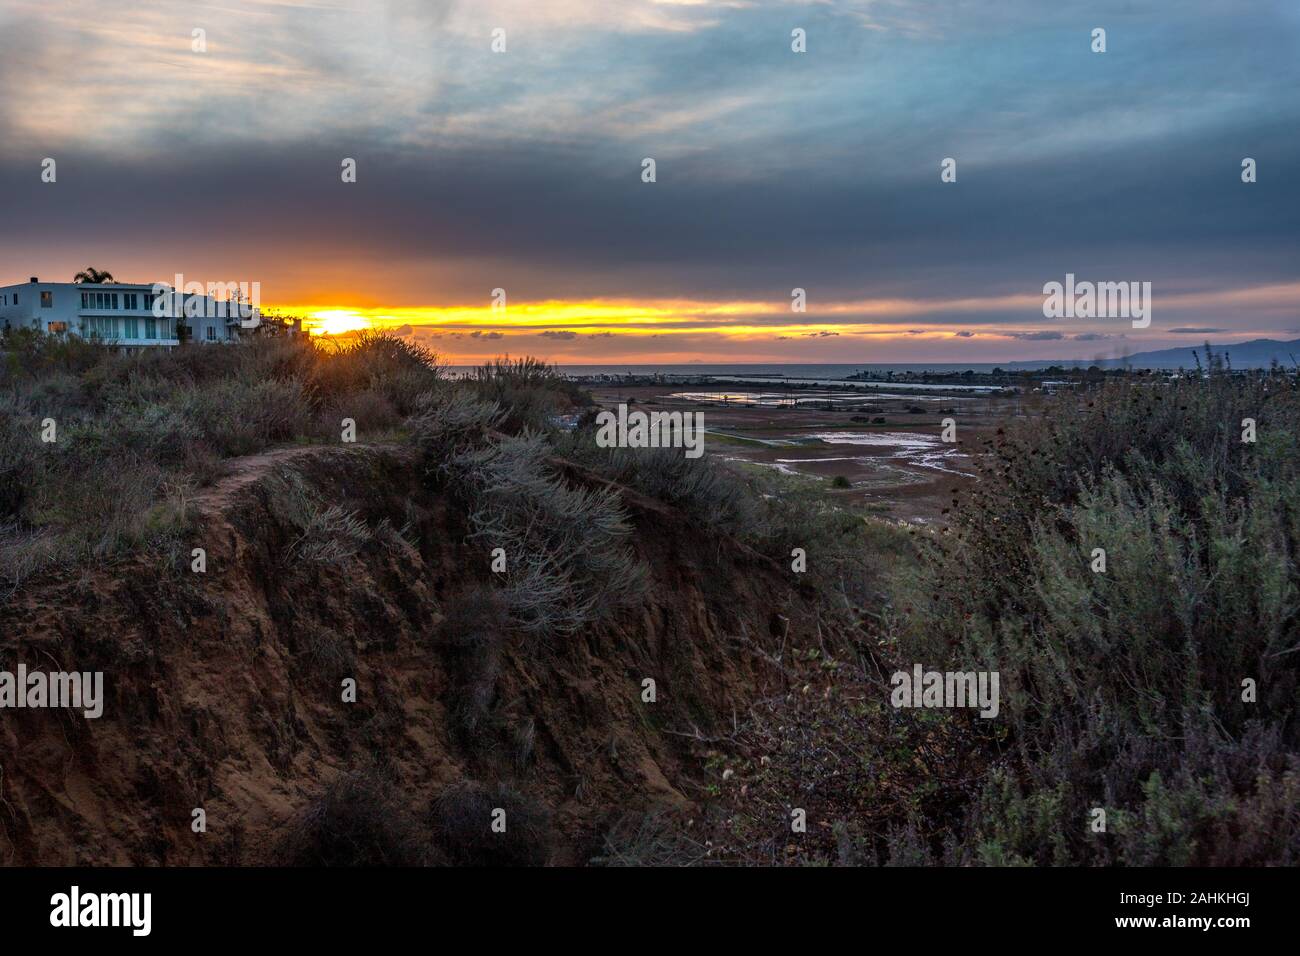 Long exposure bluff top view of Ballona Wetlands at sunset with colorful sky and Santa Monica Mountains in the distance, Playa Del Rey, California Stock Photo